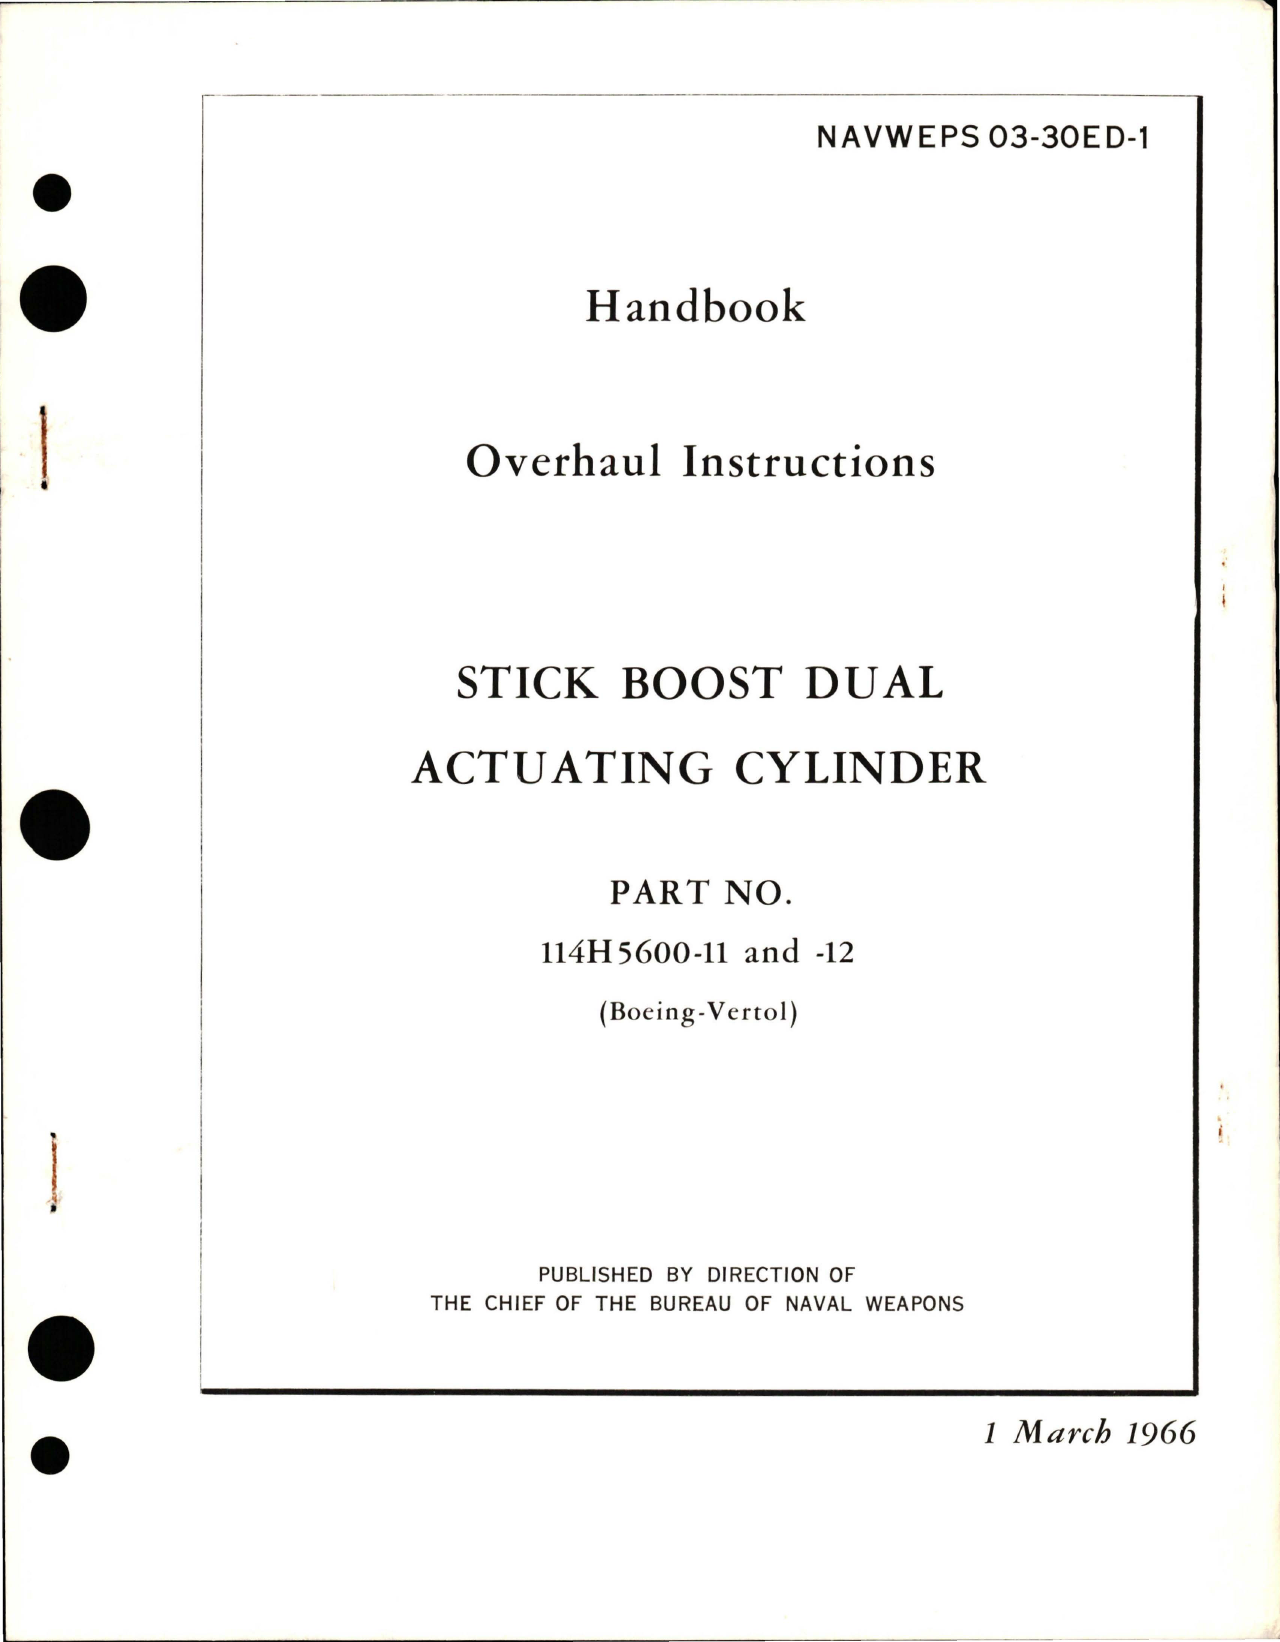 Sample page 1 from AirCorps Library document: Overhaul Instructions for Stick Boost Dual Actuating Cylinder - Part 114H5600-11 and 114H5600-12